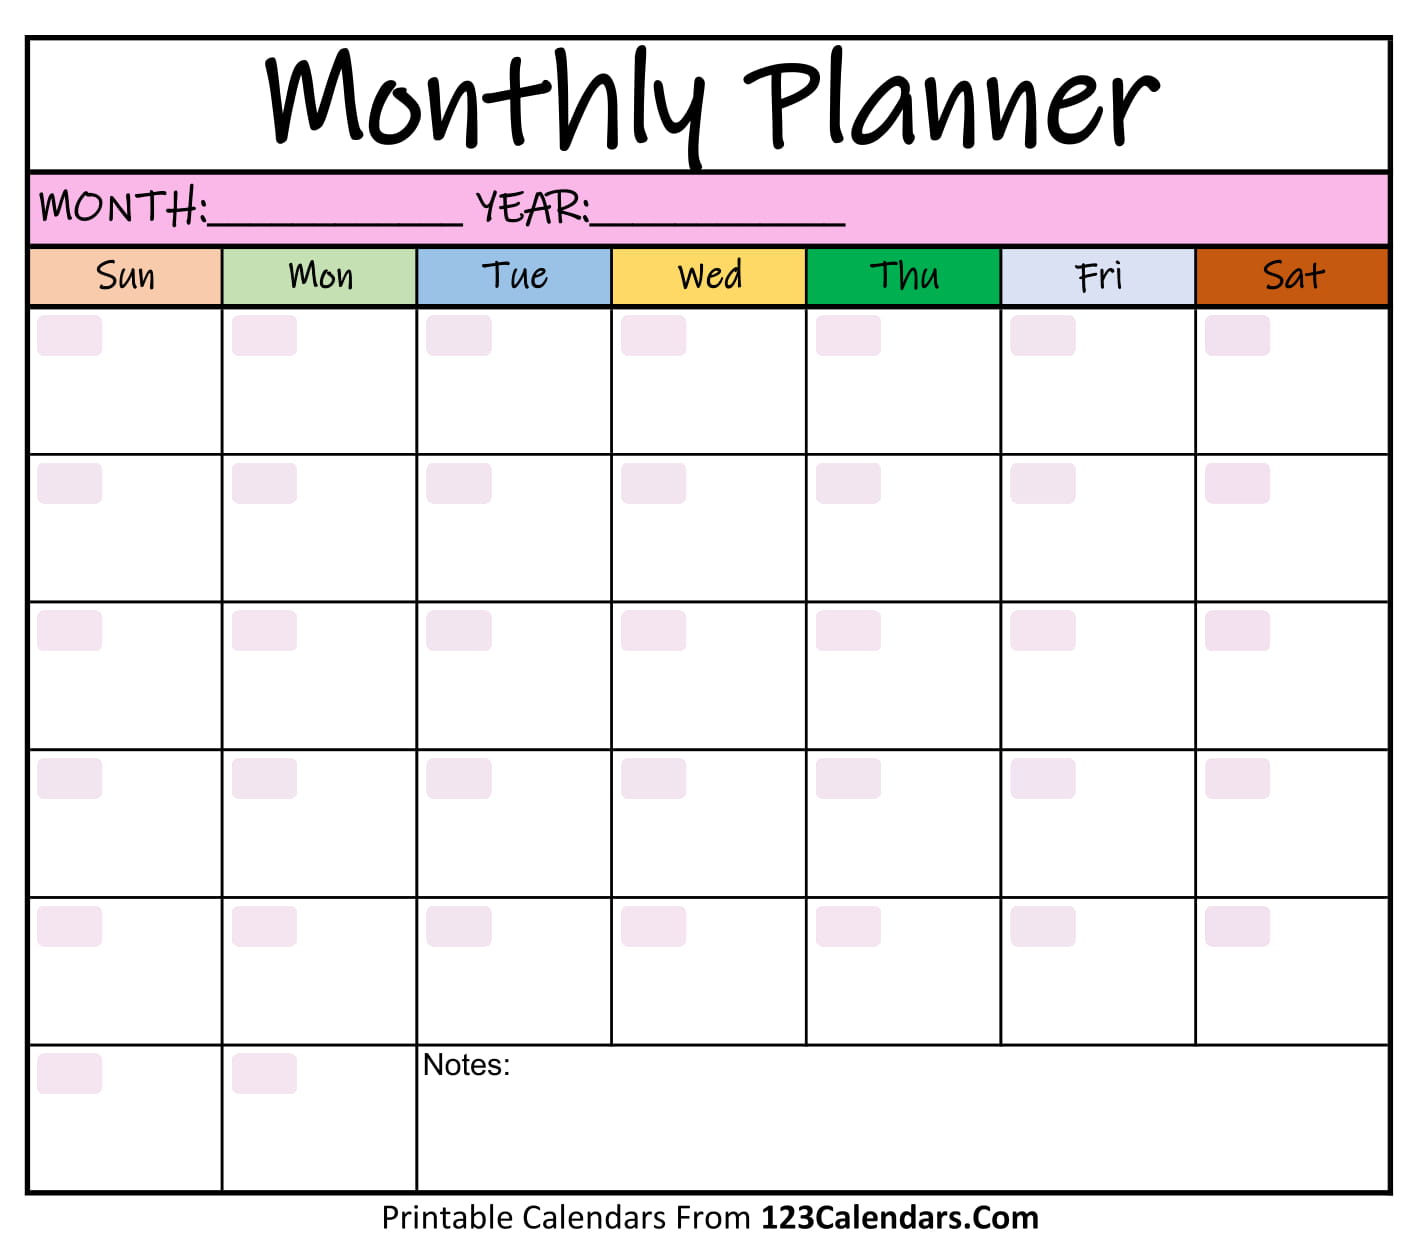 Printable Monthly Planner Templates 123Calendars